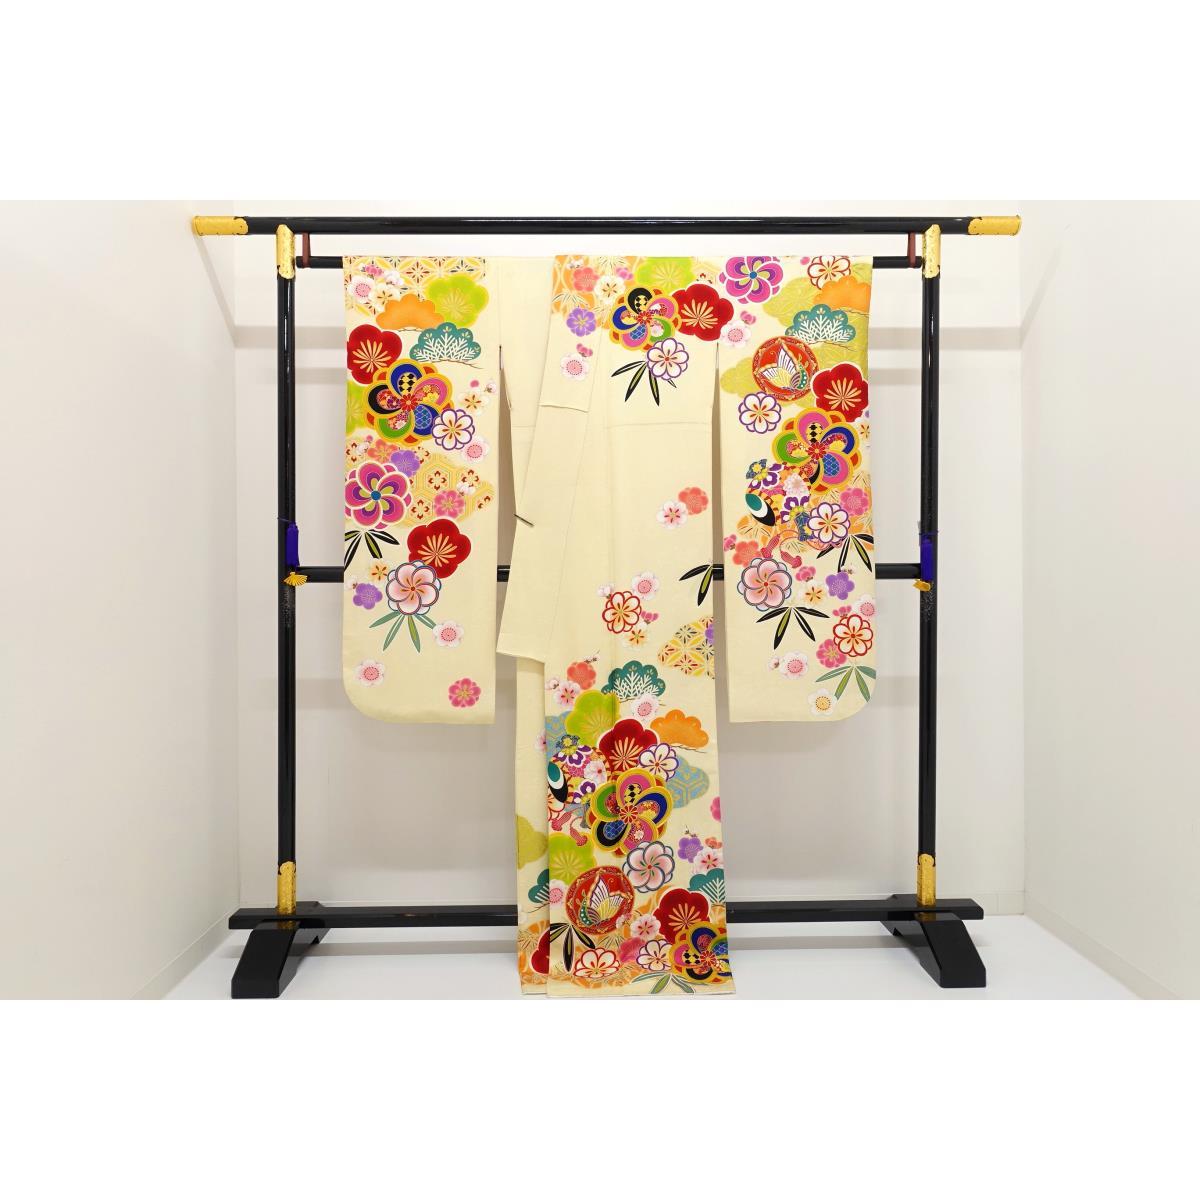 Furisode Yuzen gold color processing with embroidery